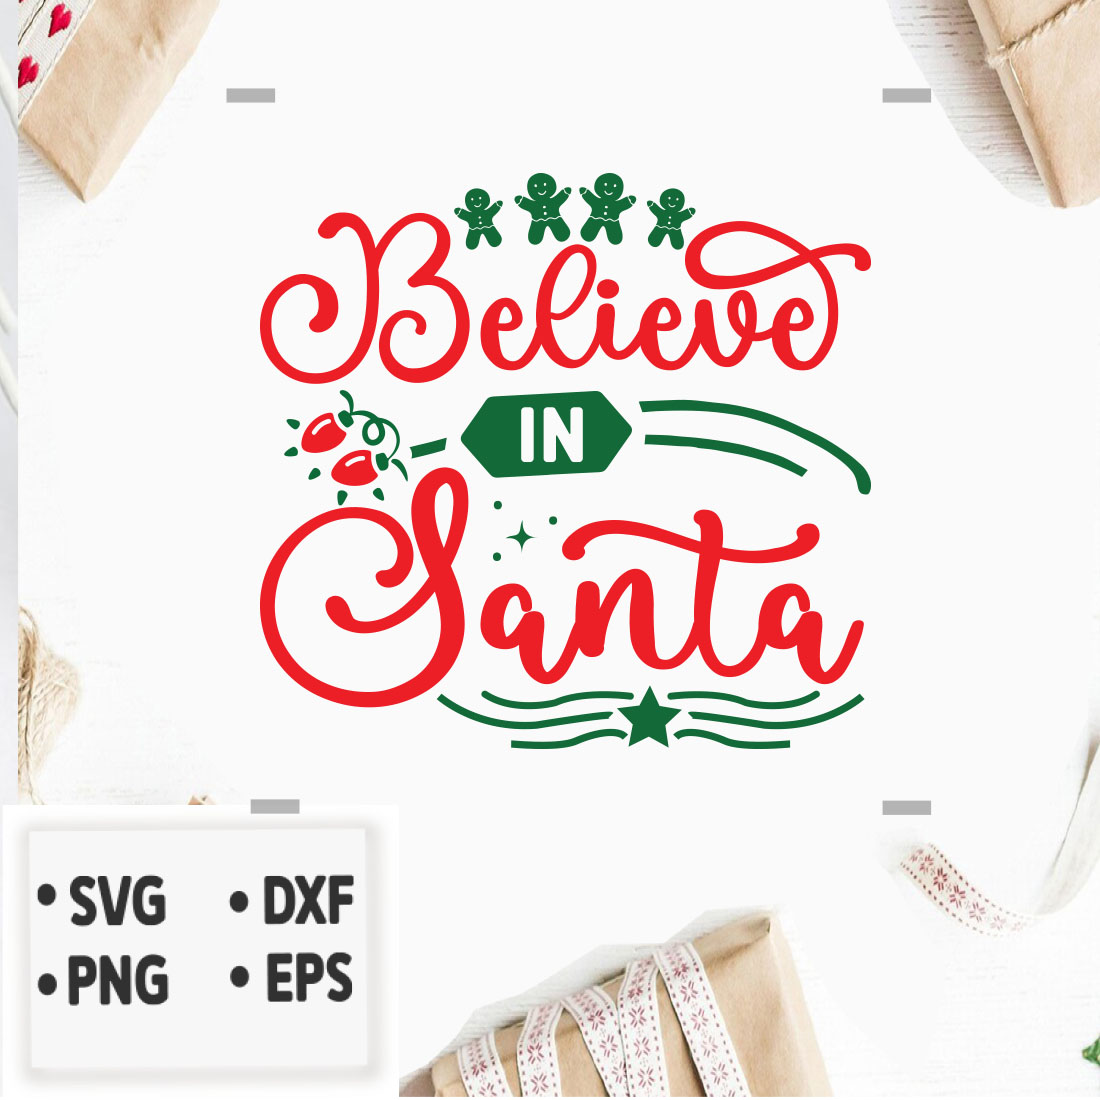 Image with colorful prints Believe in santa.